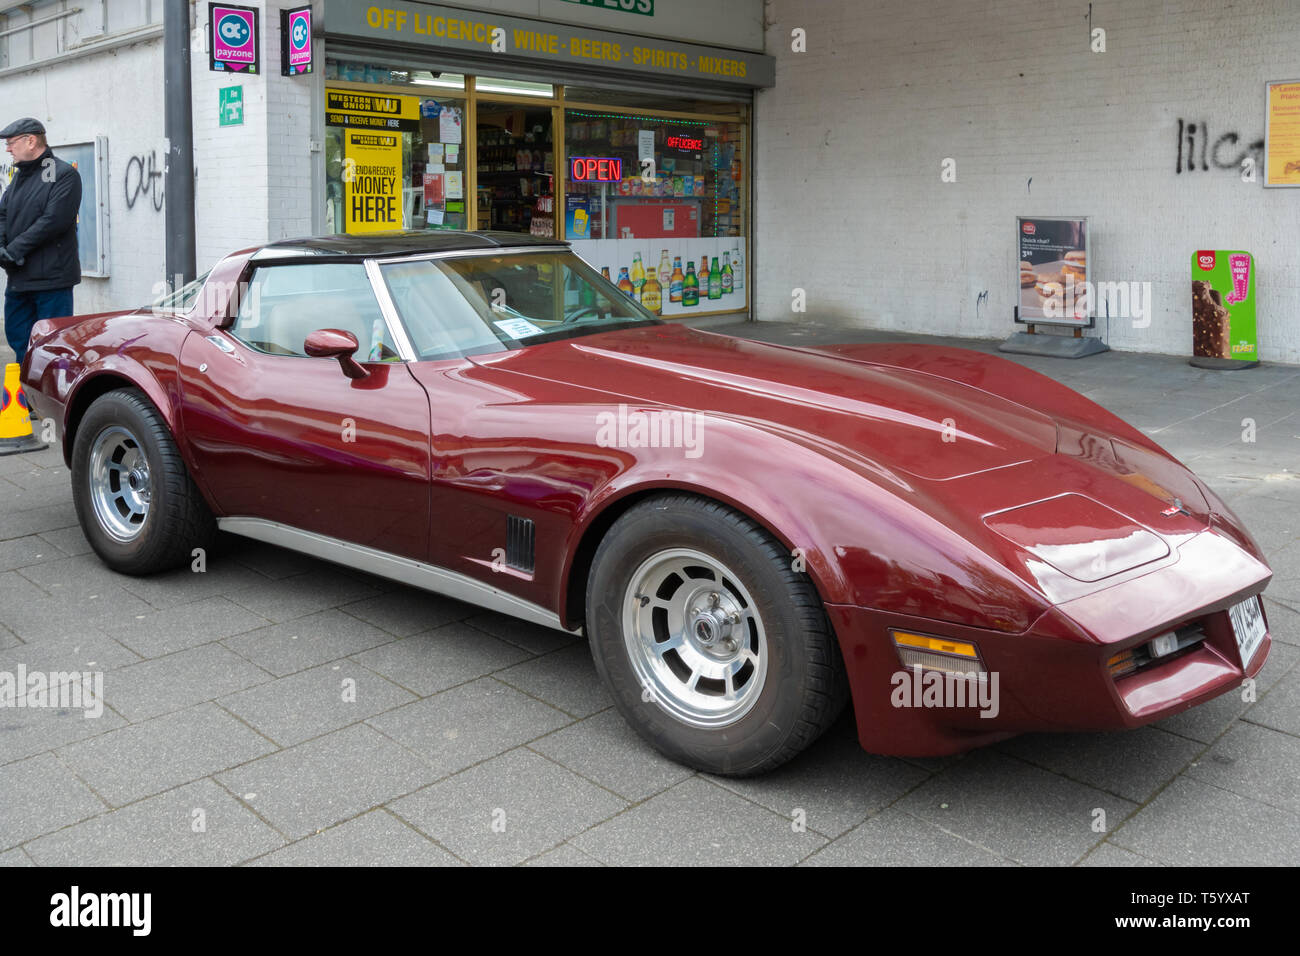 Red 1981 Ford Chevrolet Corvette Stingray sports car at a classic motor vehicle show in the UK Stock Photo